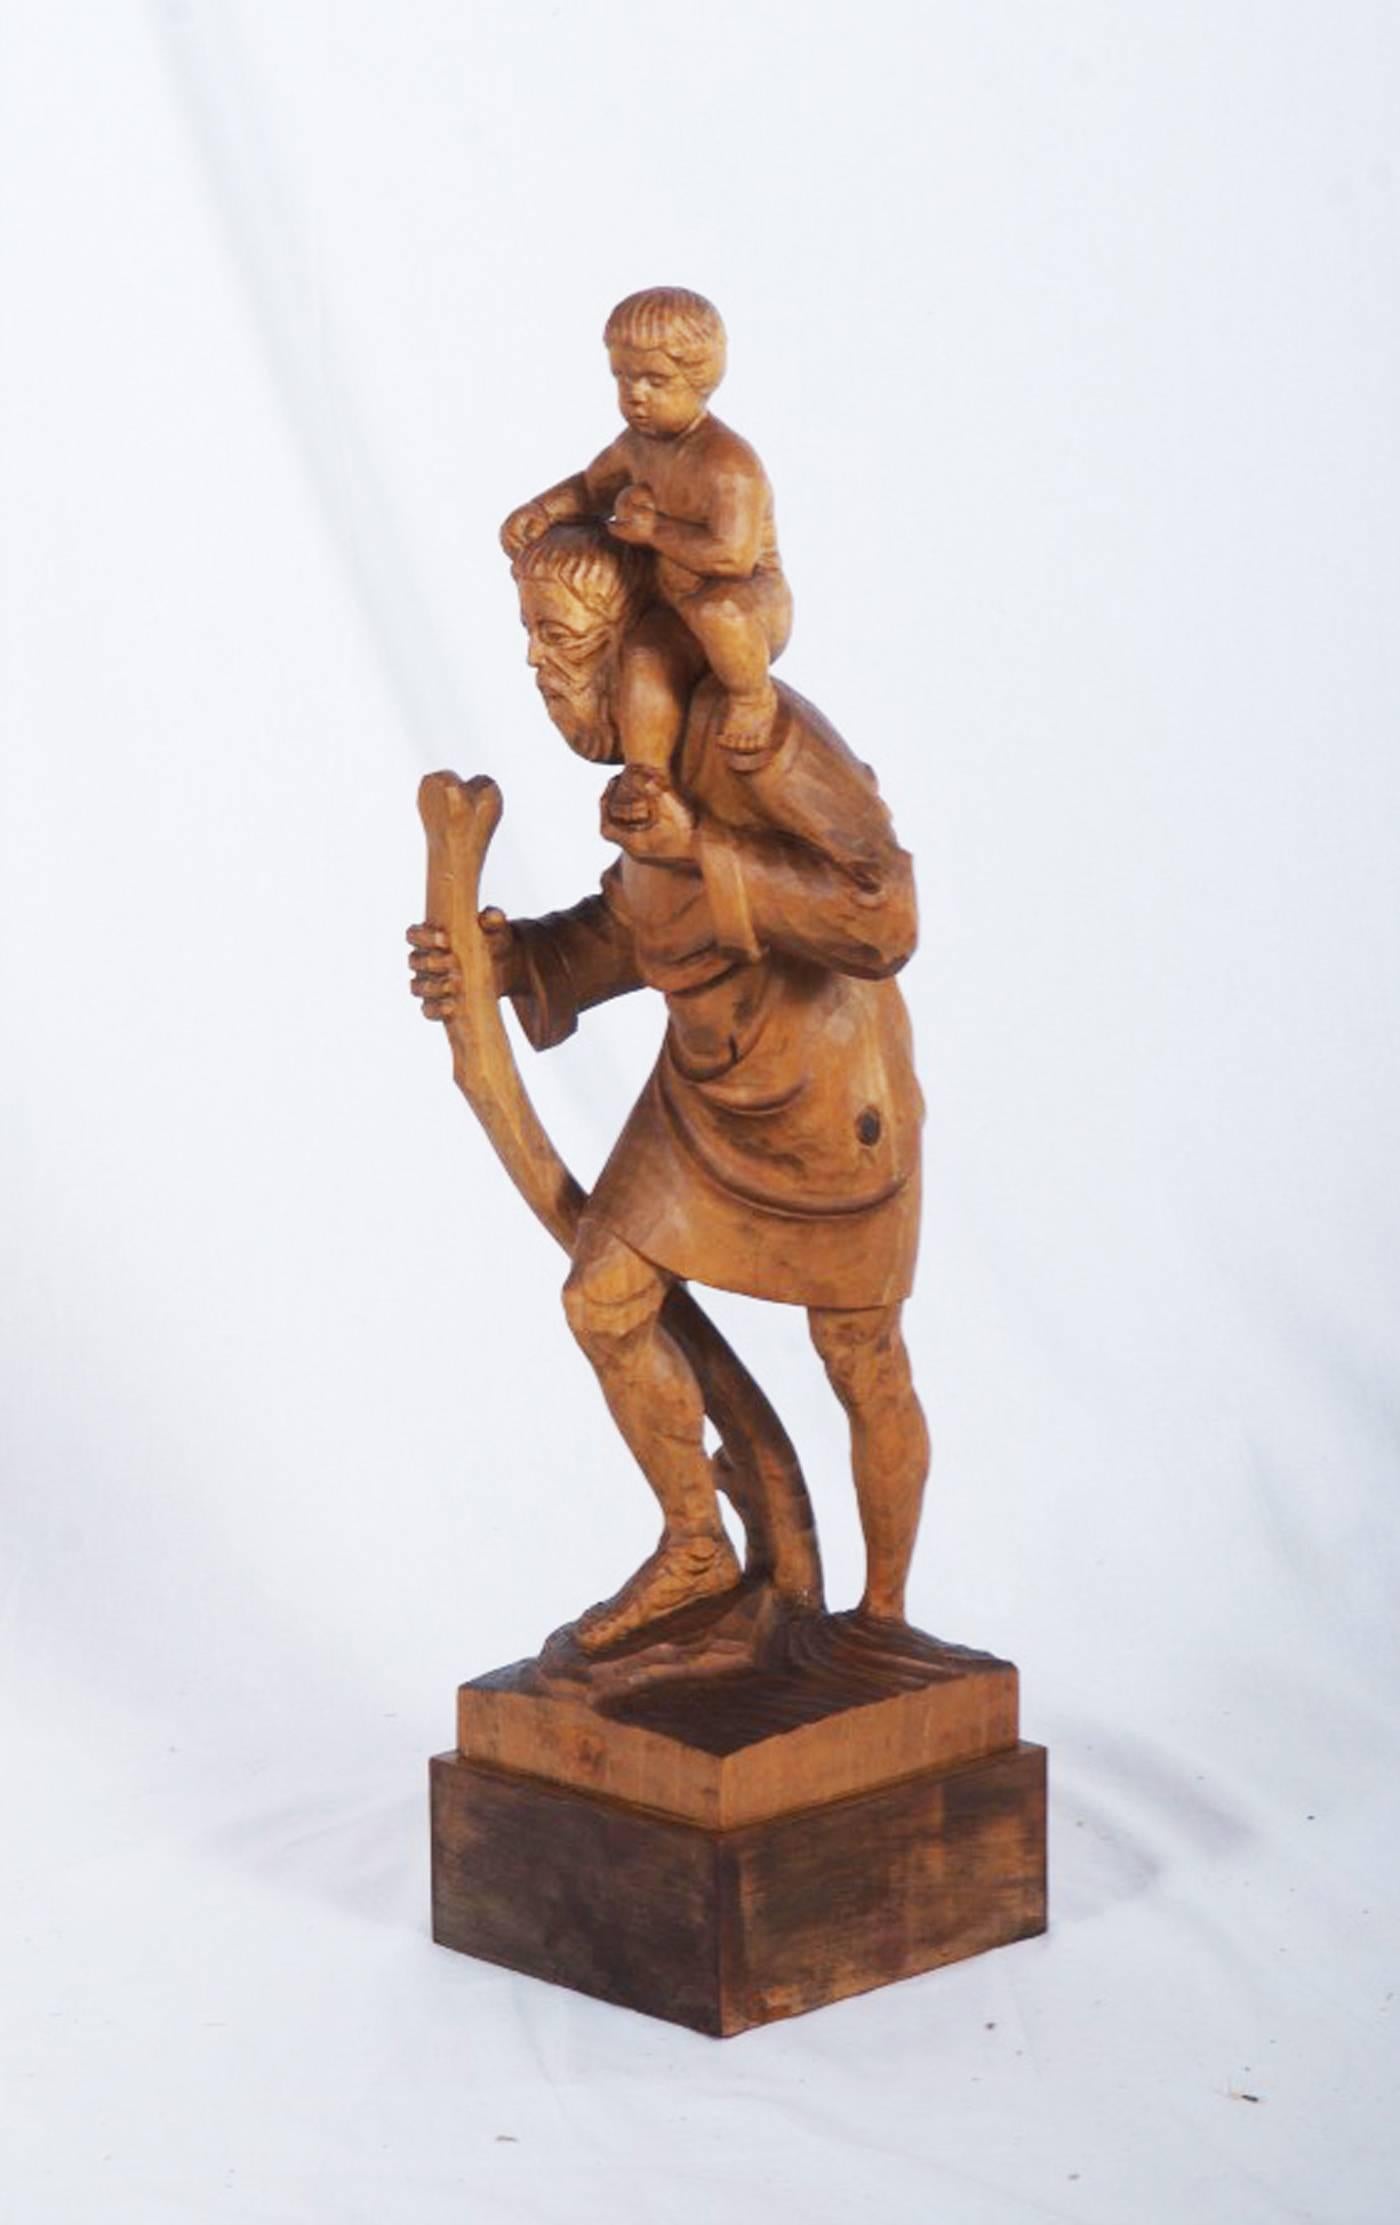 Limewood figure showing holy Christophorus with Jesus on the shoulder. Made in Hallein, Austria in the 1960s.